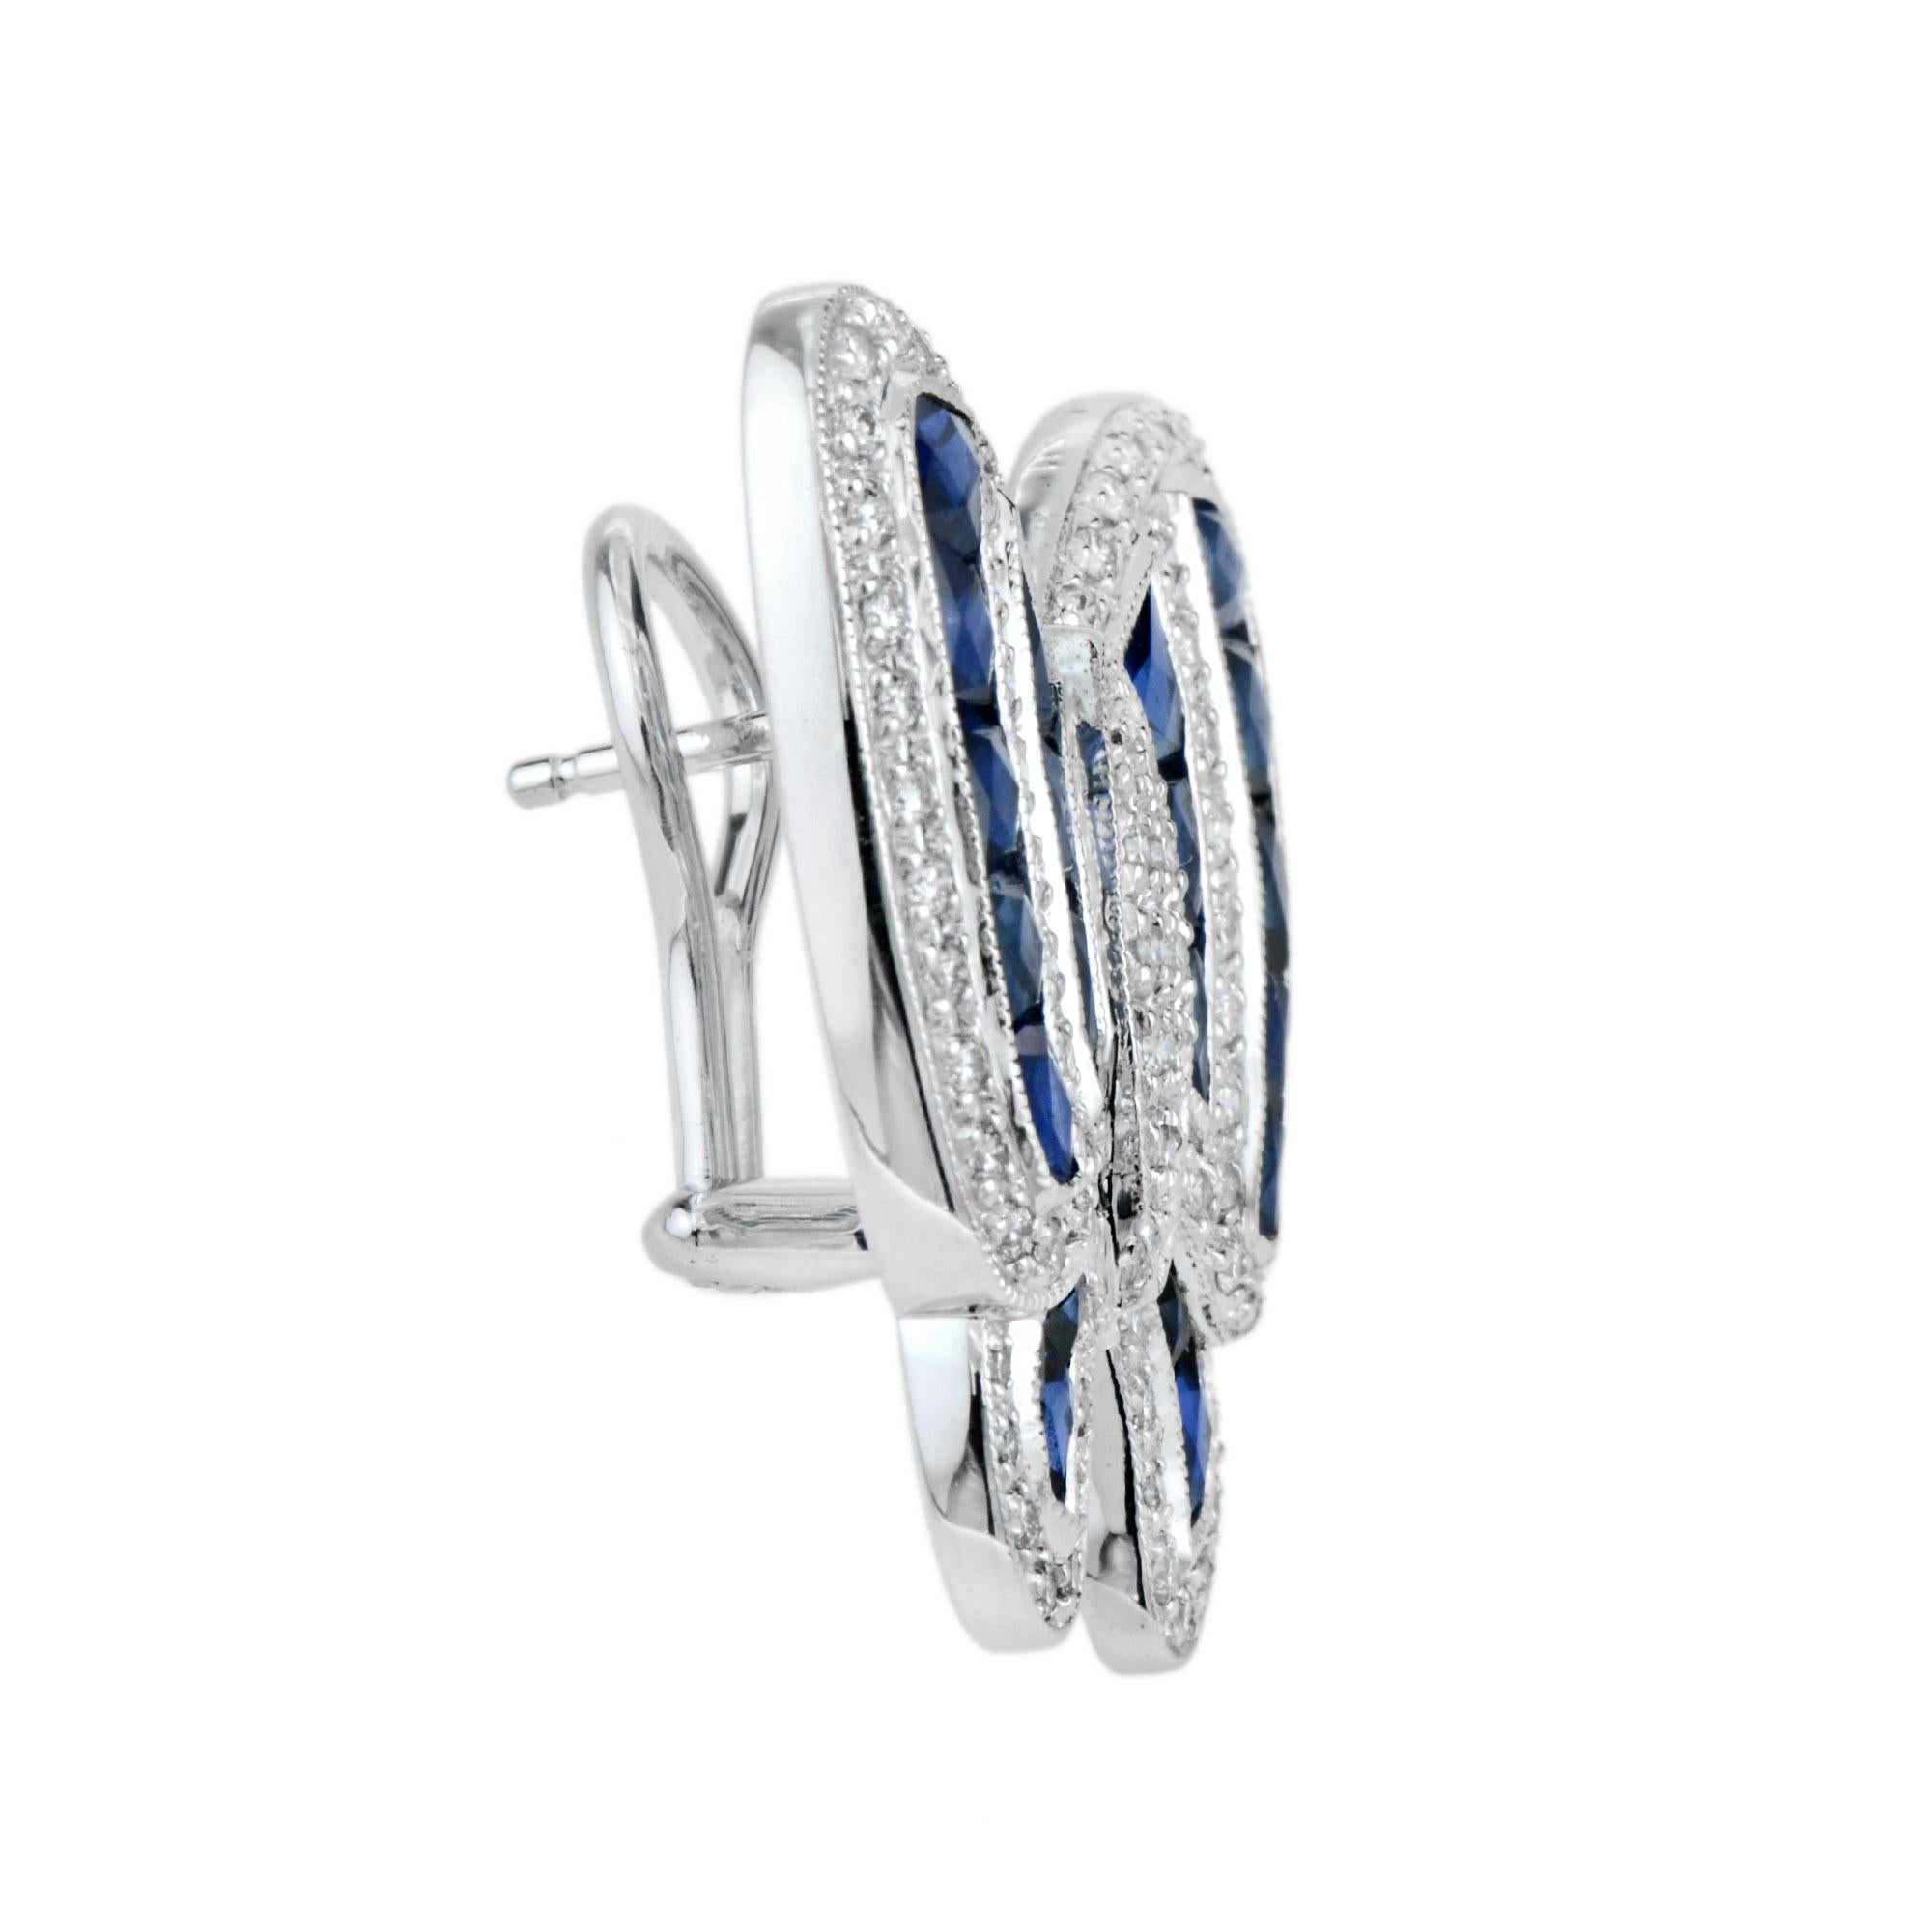 Whimsical yet elegance, these stunning earrings feature butterfly motifs. The bodies of the butterflies are round cut diamonds, and the wings are encrusted with round brilliant cut diamonds with French cut blue sapphires, capturing the unparalleled